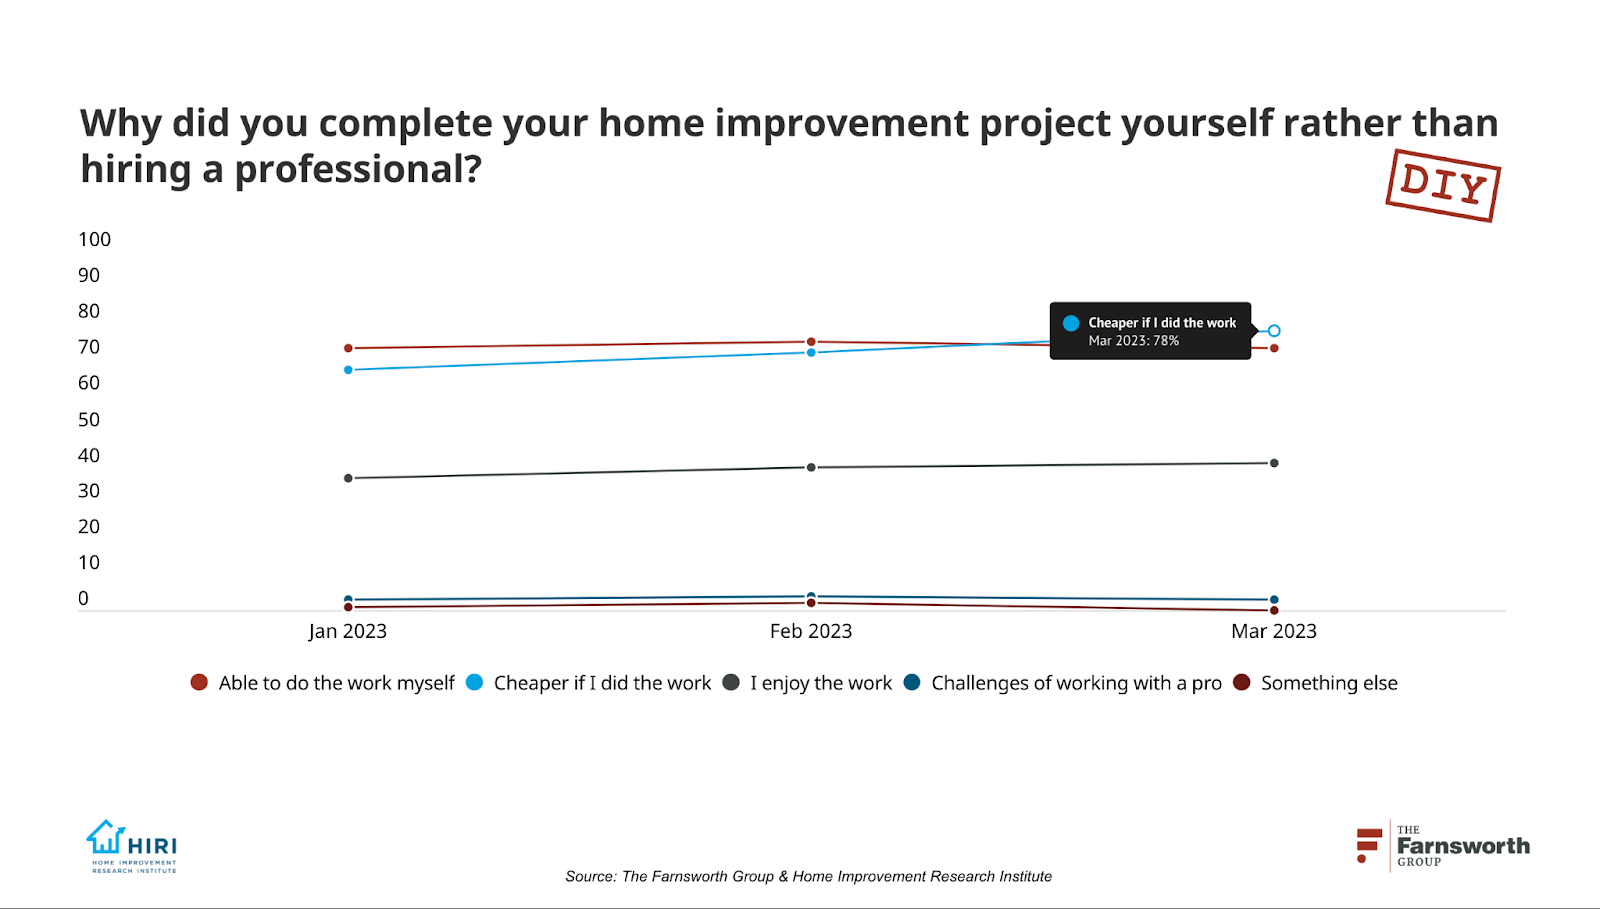 Why did you complete your home improvement project yourself rather than hiring a professional?